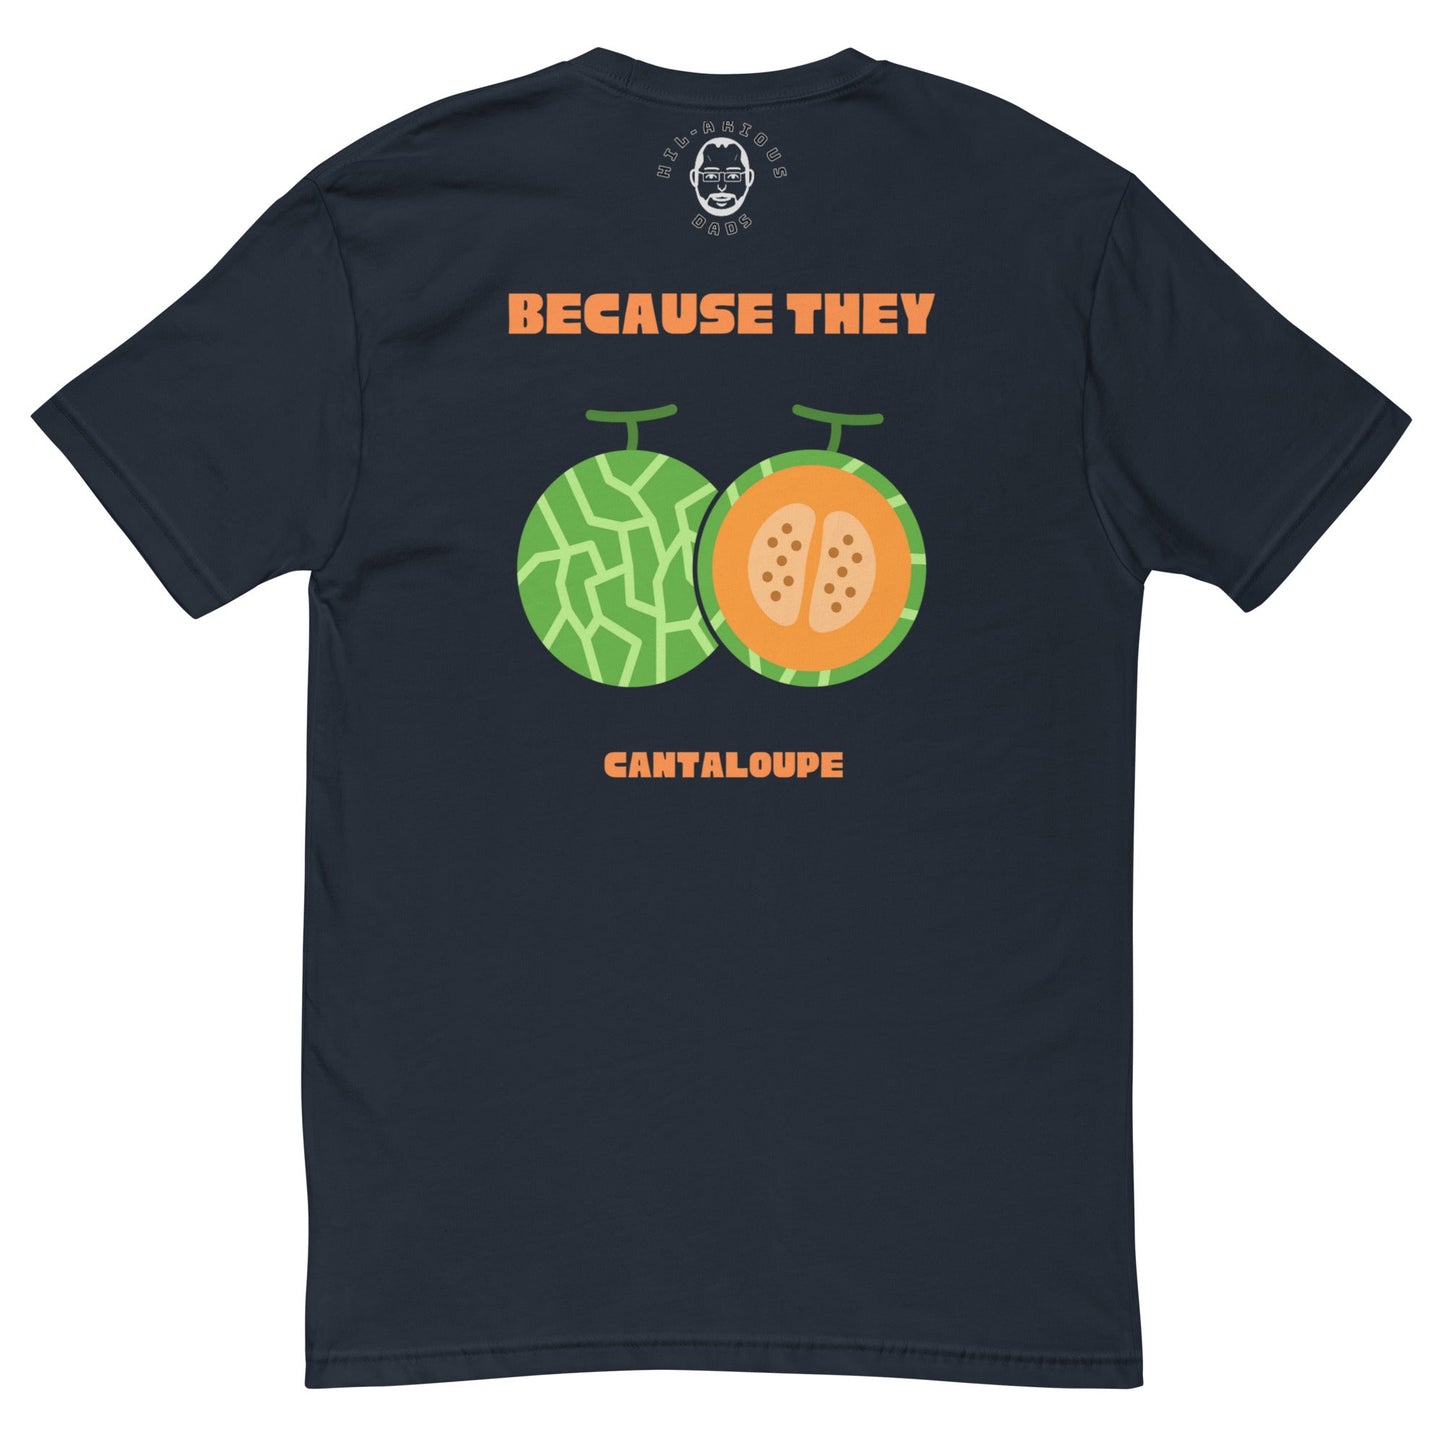 Why didn’t the melons get married?-T-shirt - Hil-arious Dads